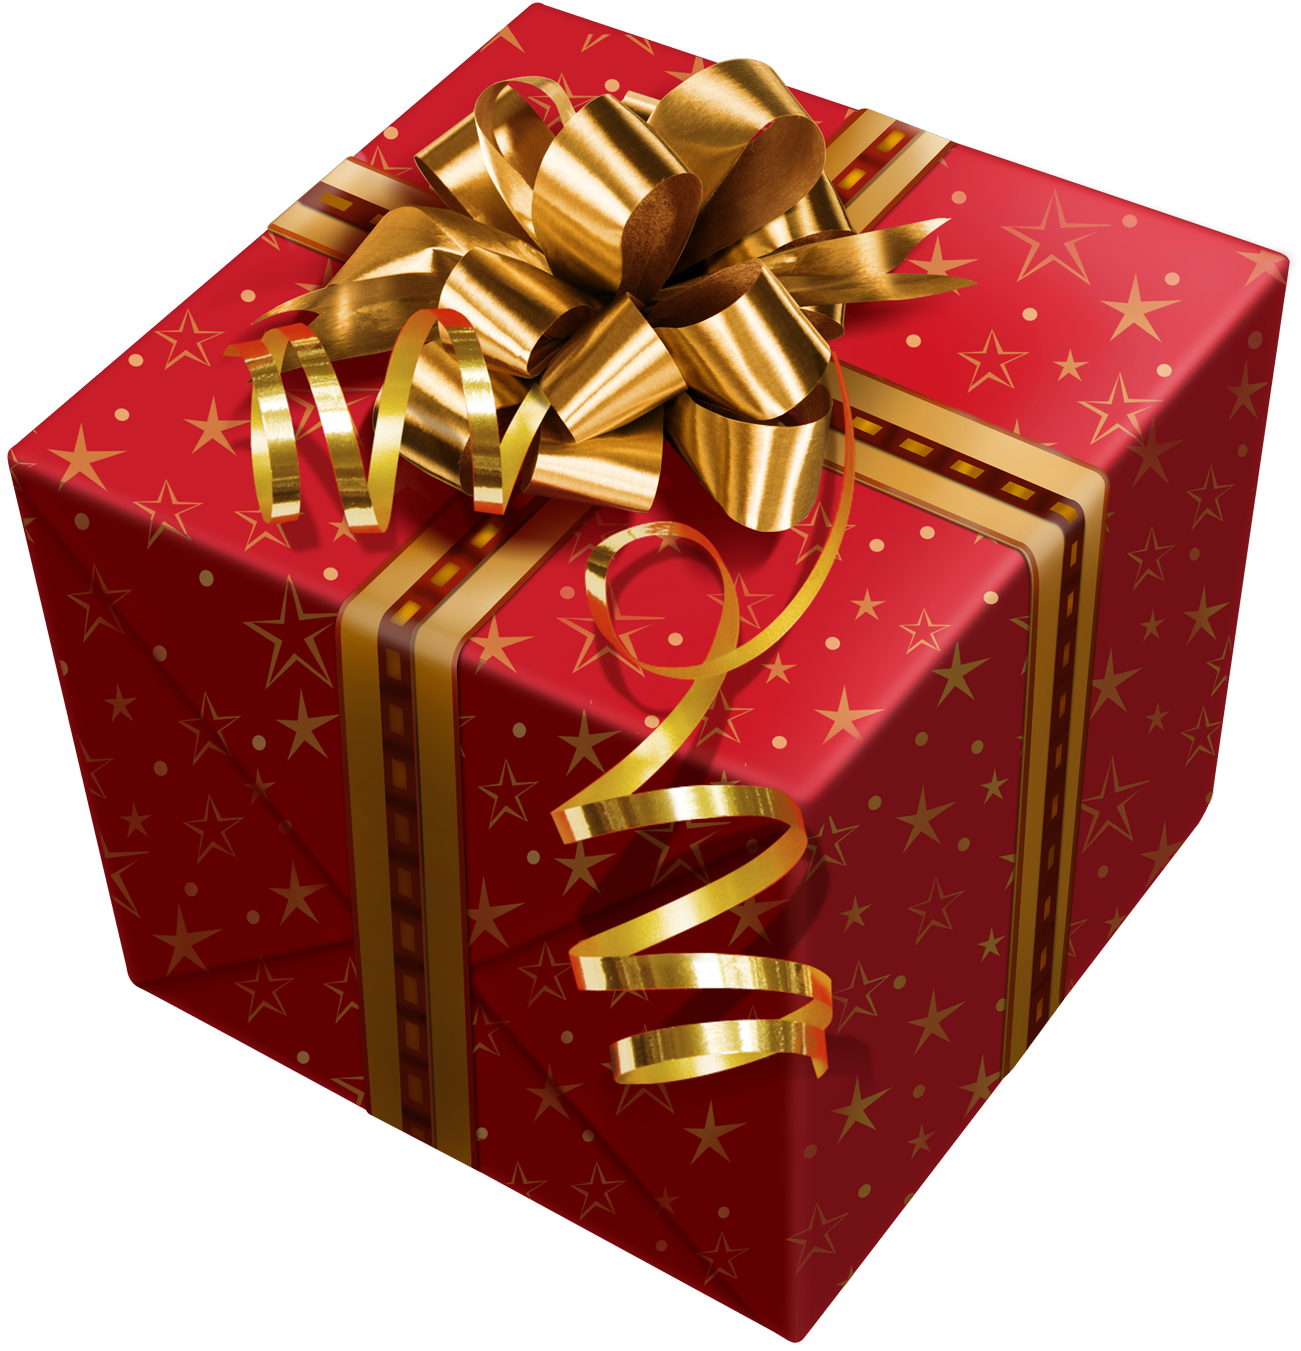 Gift Christmas Red HQ Image Free PNG Image